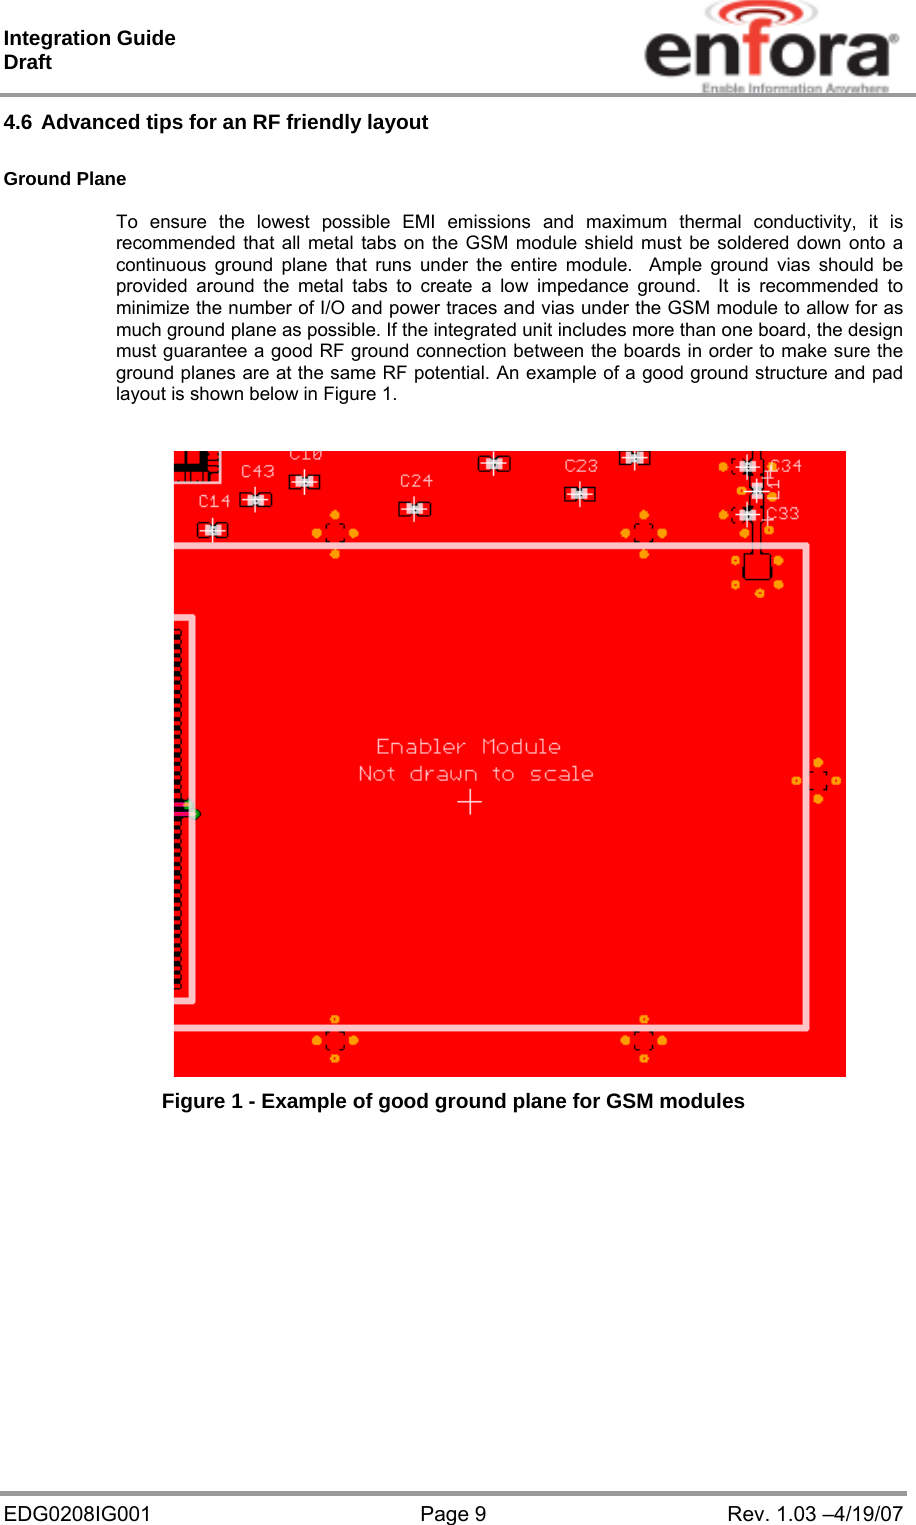 Integration Guide  Draft EDG0208IG001  Page 9  Rev. 1.03 –4/19/07 4.6 Advanced tips for an RF friendly layout  Ground Plane  To ensure the lowest possible EMI emissions and maximum thermal conductivity, it is recommended that all metal tabs on the GSM module shield must be soldered down onto a continuous ground plane that runs under the entire module.  Ample ground vias should be provided around the metal tabs to create a low impedance ground.  It is recommended to minimize the number of I/O and power traces and vias under the GSM module to allow for as much ground plane as possible. If the integrated unit includes more than one board, the design must guarantee a good RF ground connection between the boards in order to make sure the ground planes are at the same RF potential. An example of a good ground structure and pad layout is shown below in Figure 1.   Figure 1 - Example of good ground plane for GSM modules   